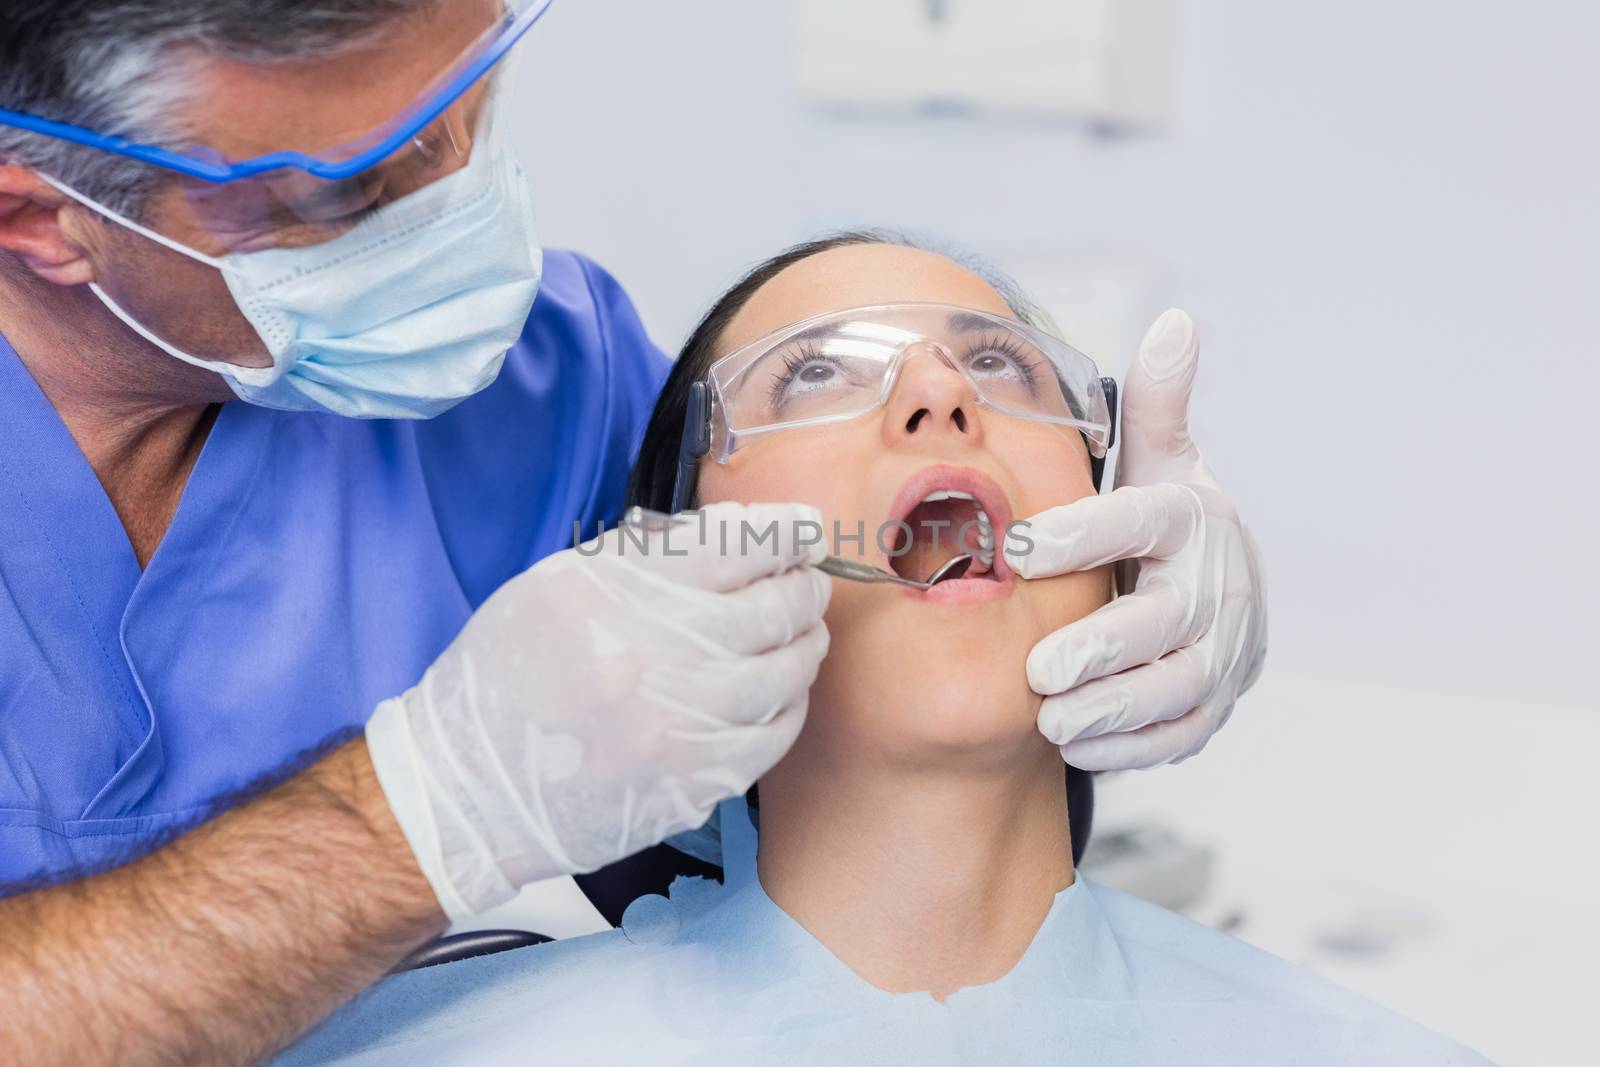 Dentist examining a patient with angle mirror in dental clinic